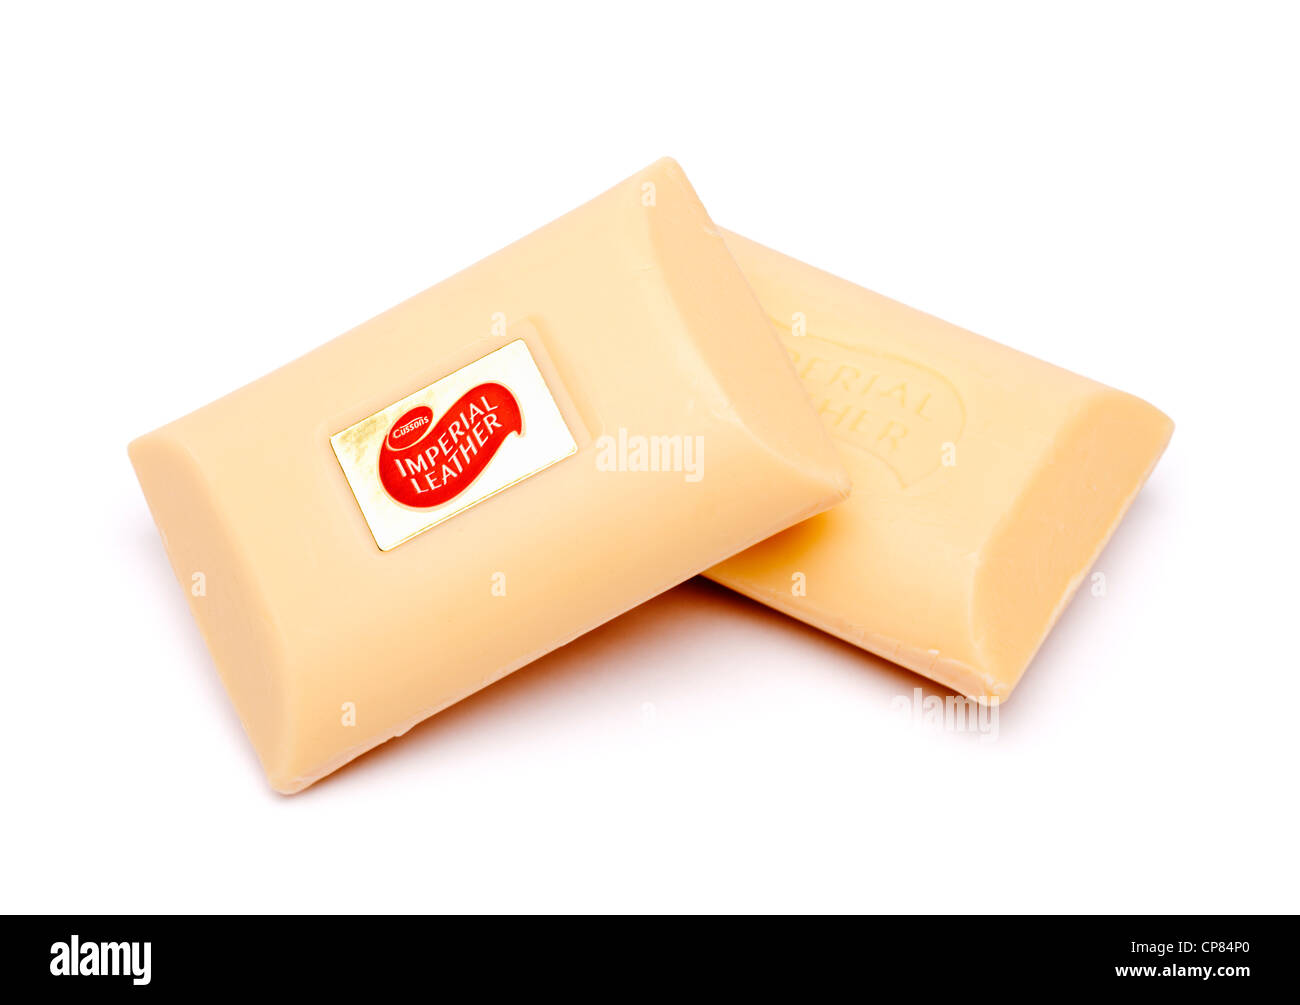 Imperial Leather soap bars Stock Photo